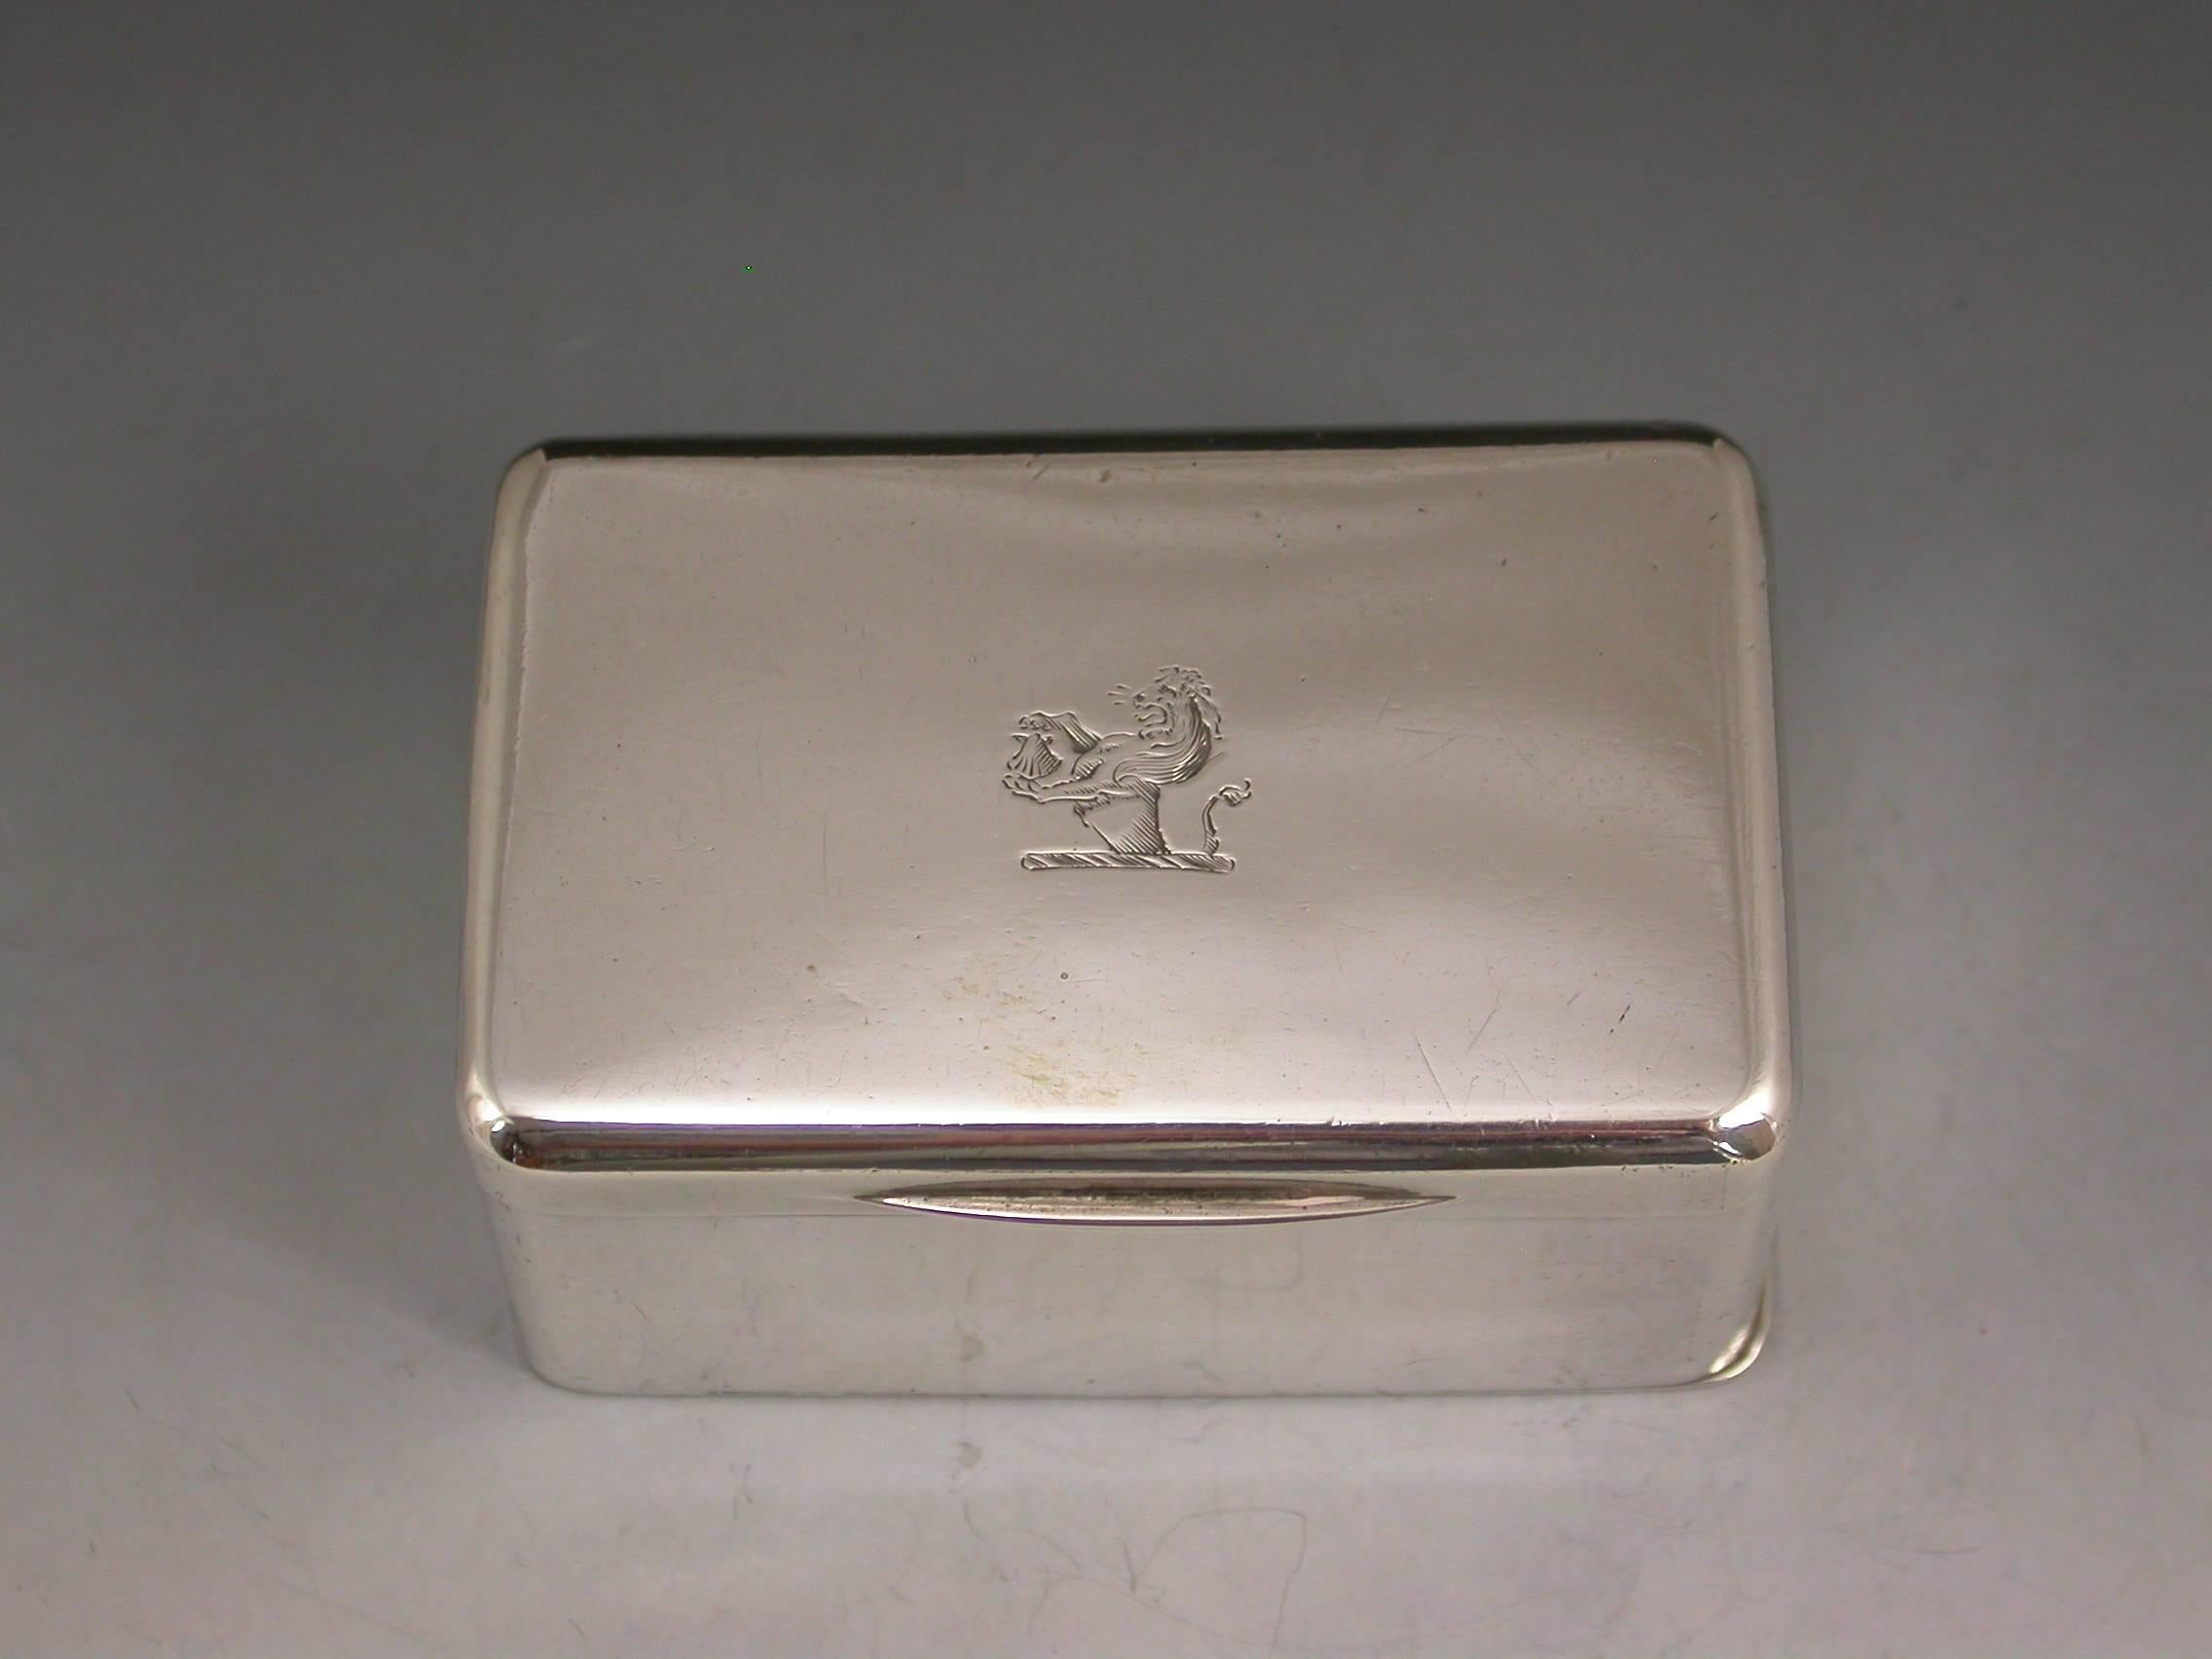 A huge George III silver nutmeg grater of plain rounded rectangular form, the hinged cover engraved with a crest depicting a demi-lion holding a scallop shell, the interior with original pierced steel grater and the base with flat concealed